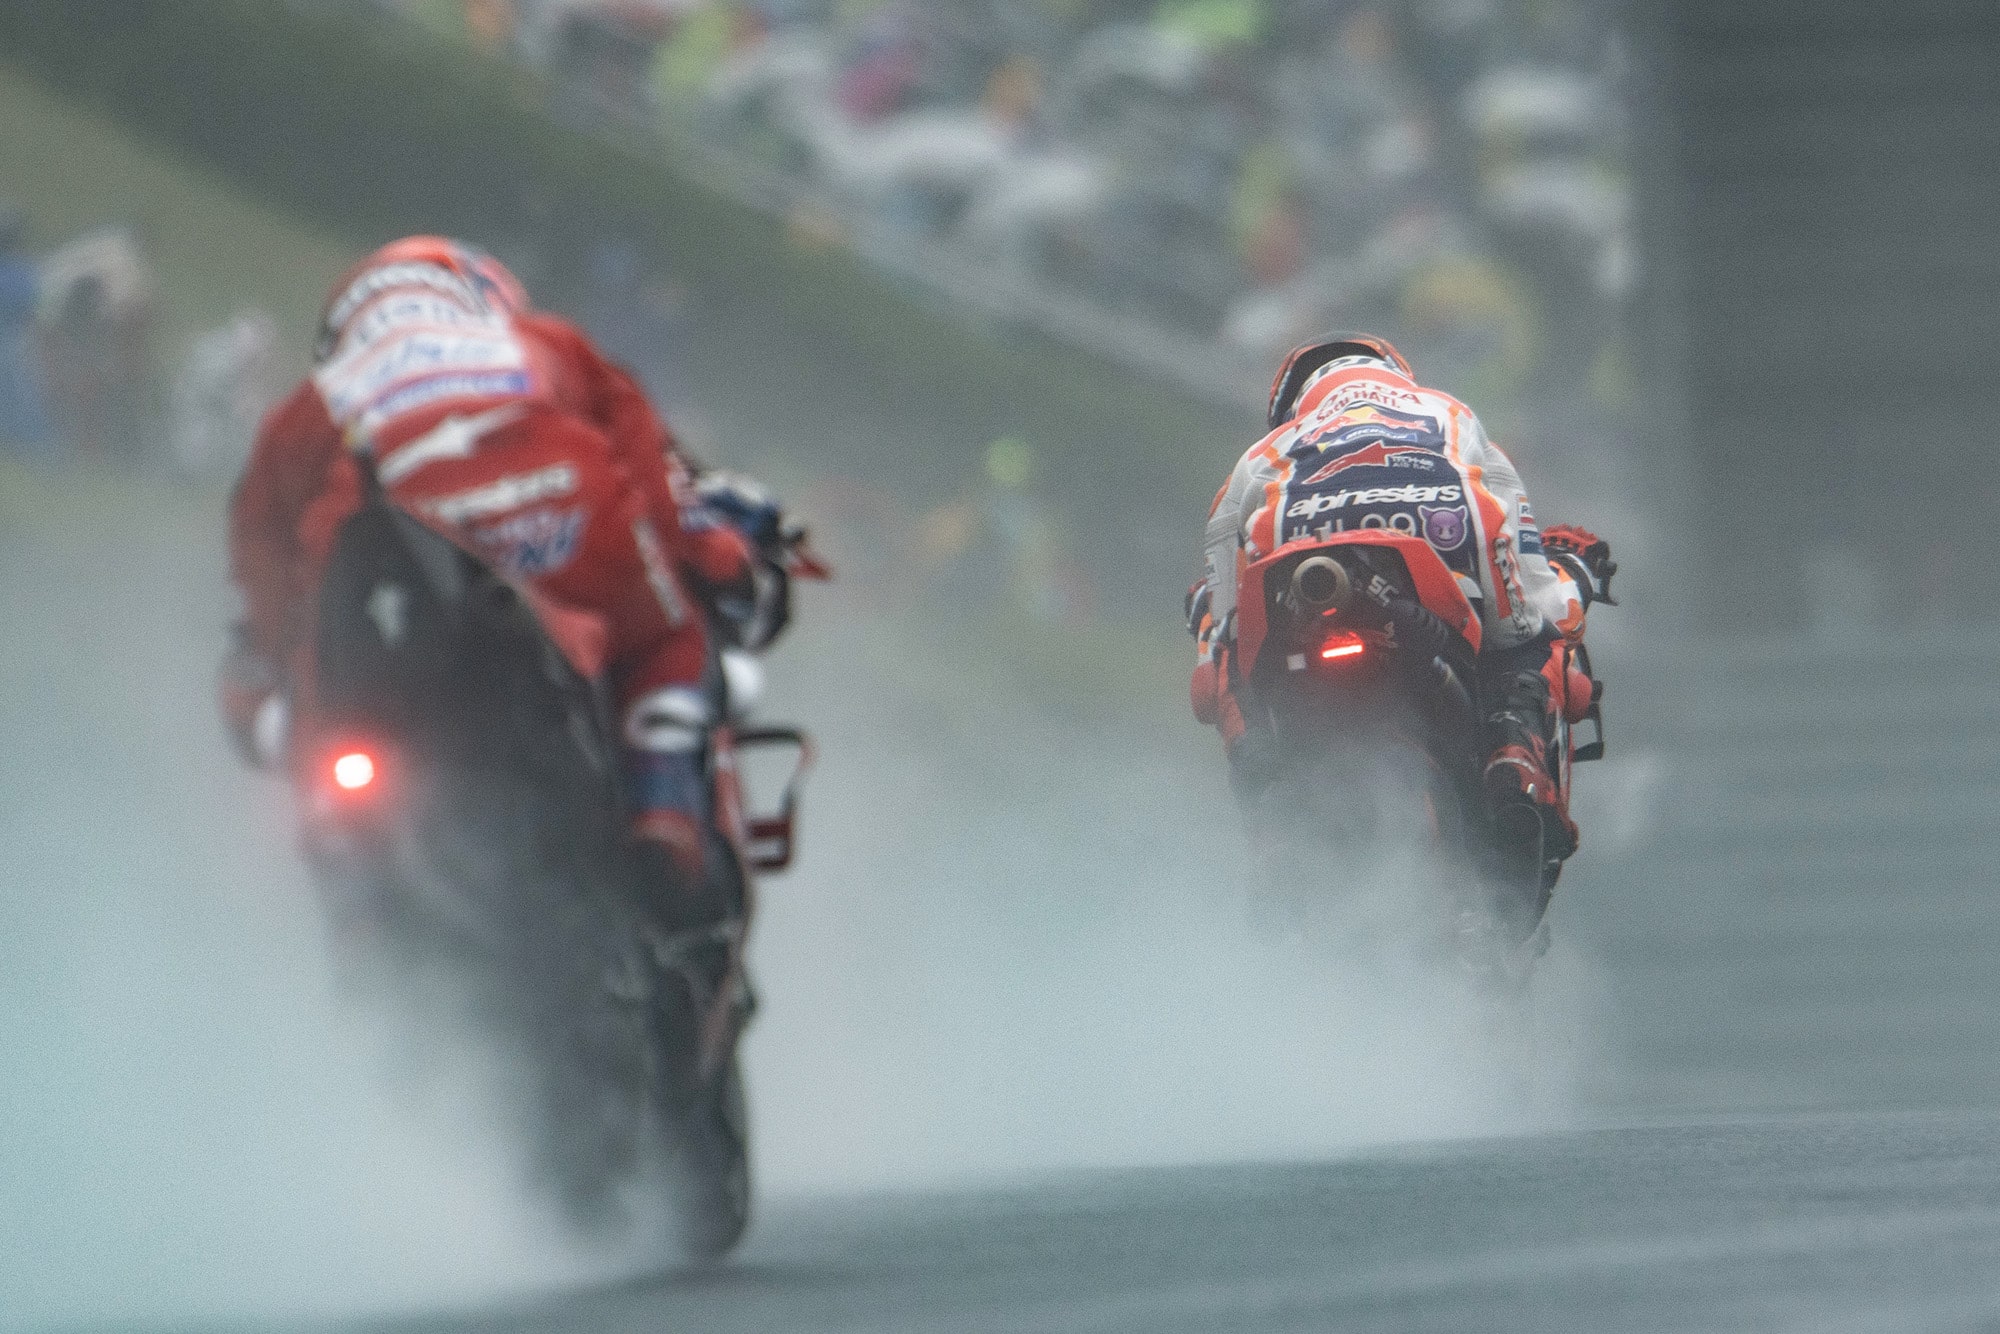 Spray during wet practice at the 2019 MotoGP Grand Prix of Japan